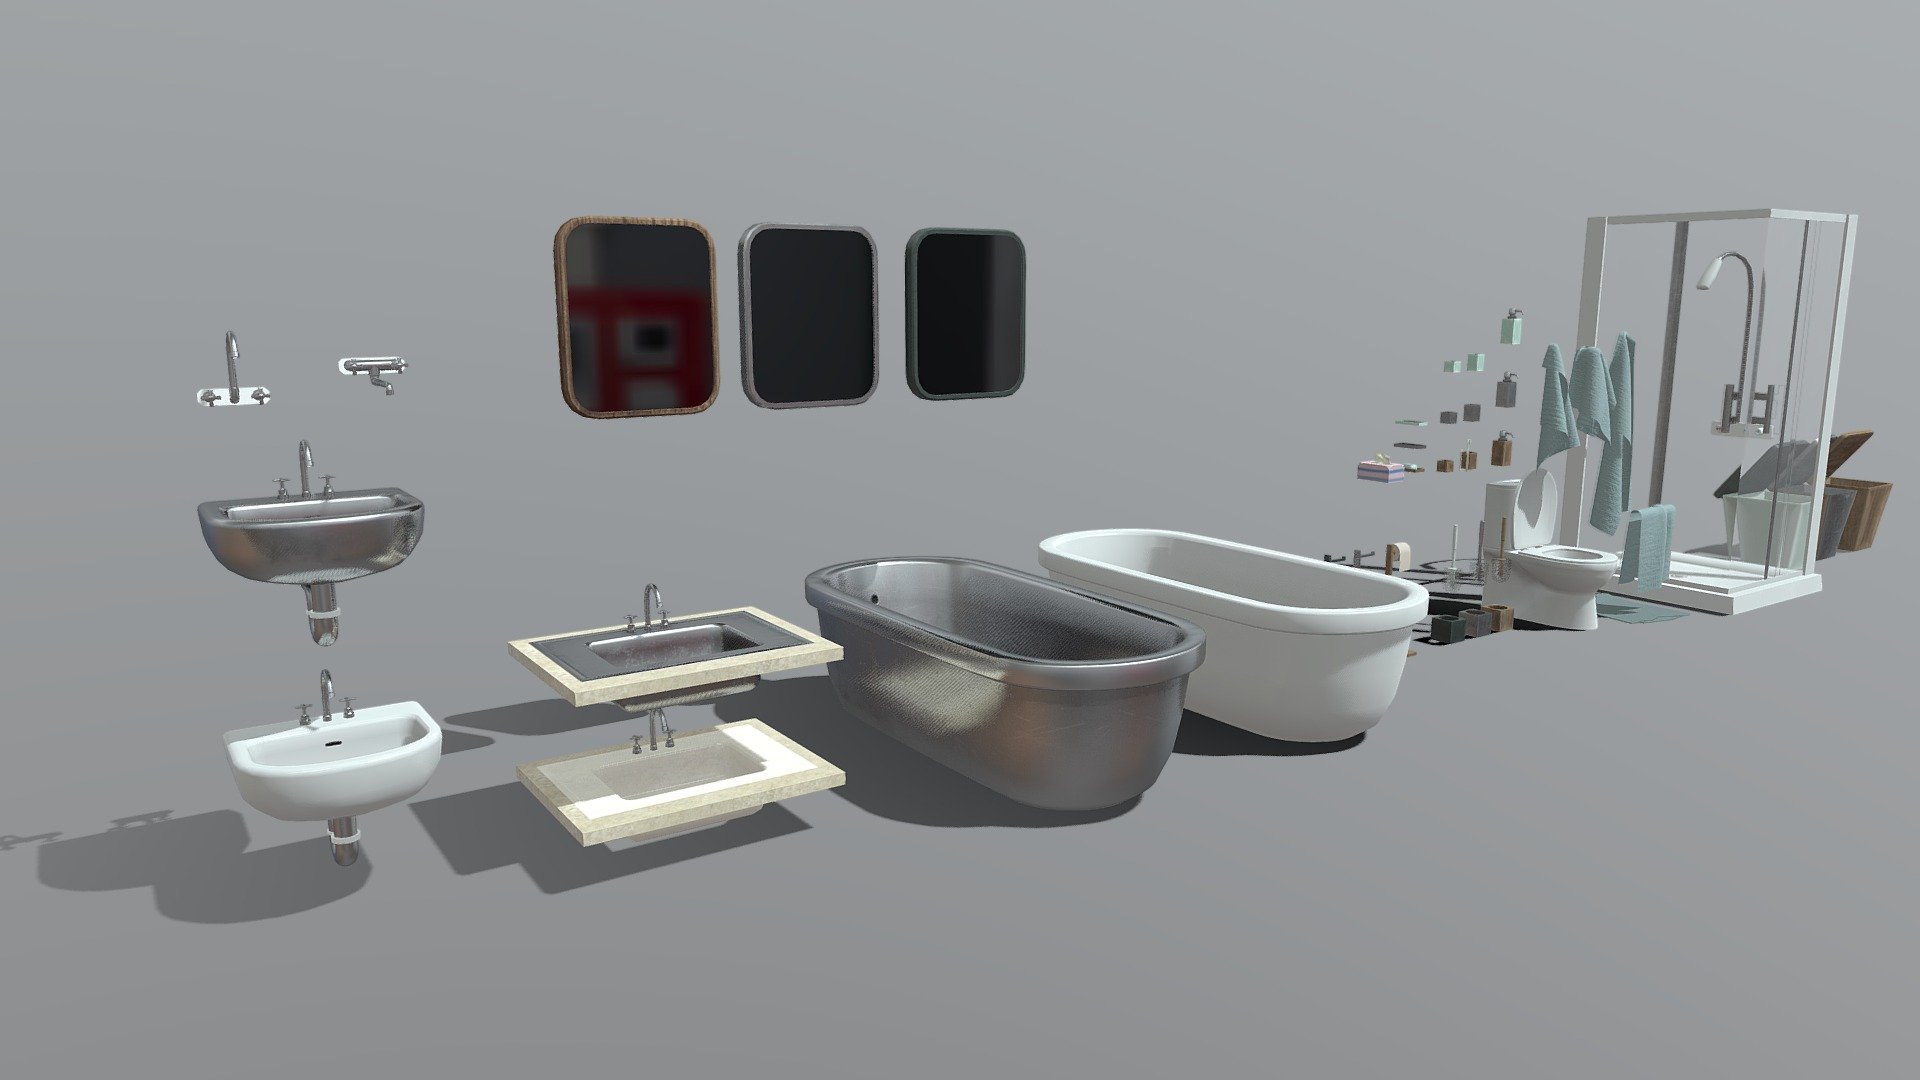 Includes the following models:

Pack 1:




basic sinks in 2 textures (ceramic &amp; metal)

2 different styled faucets

flat sink with metal &amp; ceramic basin and marmor base plate

Pack 2:




mirrors with 3 different textured frames (wood, metal, stone)

Pack 3: 




bathtubs with 2 textures (ceramic and metal)

Pack 4:




bathroom accessoires, for content check https://skfb.ly/oANFF

Pack 5:




toilet in ceramic texture

Pack 6:




set of 4 towels with cotton texture

bathroom/shower mat with cotton texture

Pack 7:




shower with glass doors, ceramic basin and handles

wall-mounted and flexible shower head

Pack 8:




bathroom bin/trash can with lid in 3 textures (plastic, wooden, metal)

This bundle is off by more than 50% of the individual base prices!

Check our account for other style-fitting models 3d model